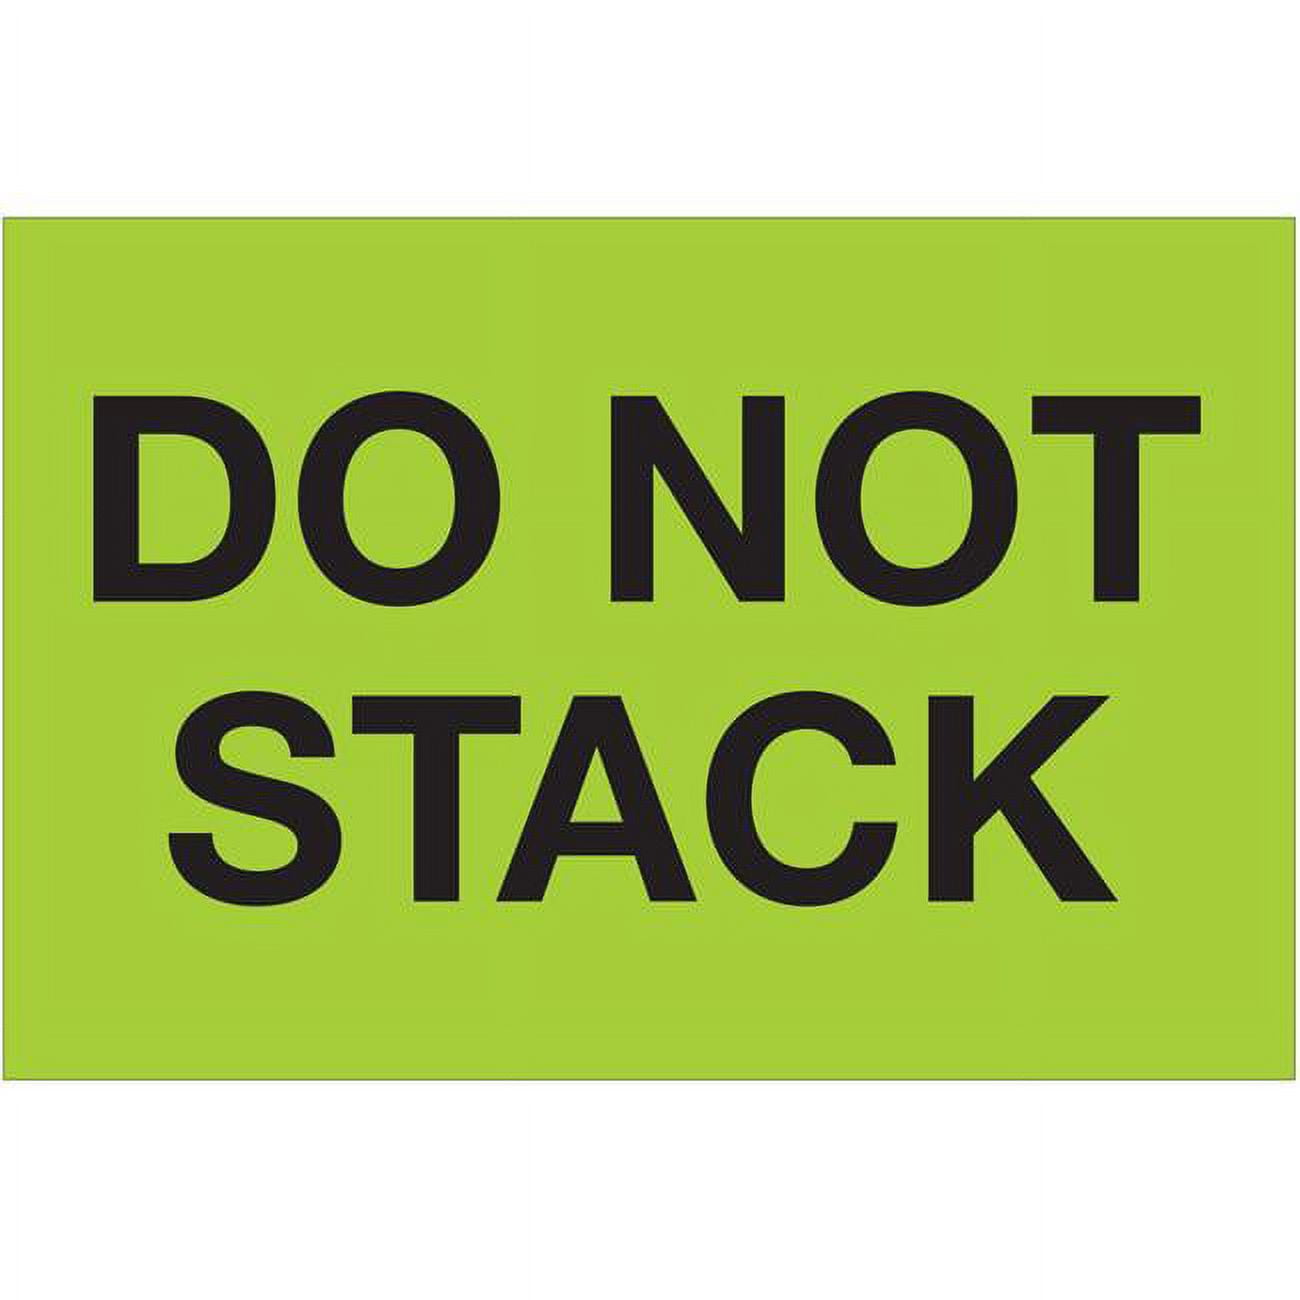 Dl1619 2 X 3 In. Do Not Stack Labels, Fluorescent Green